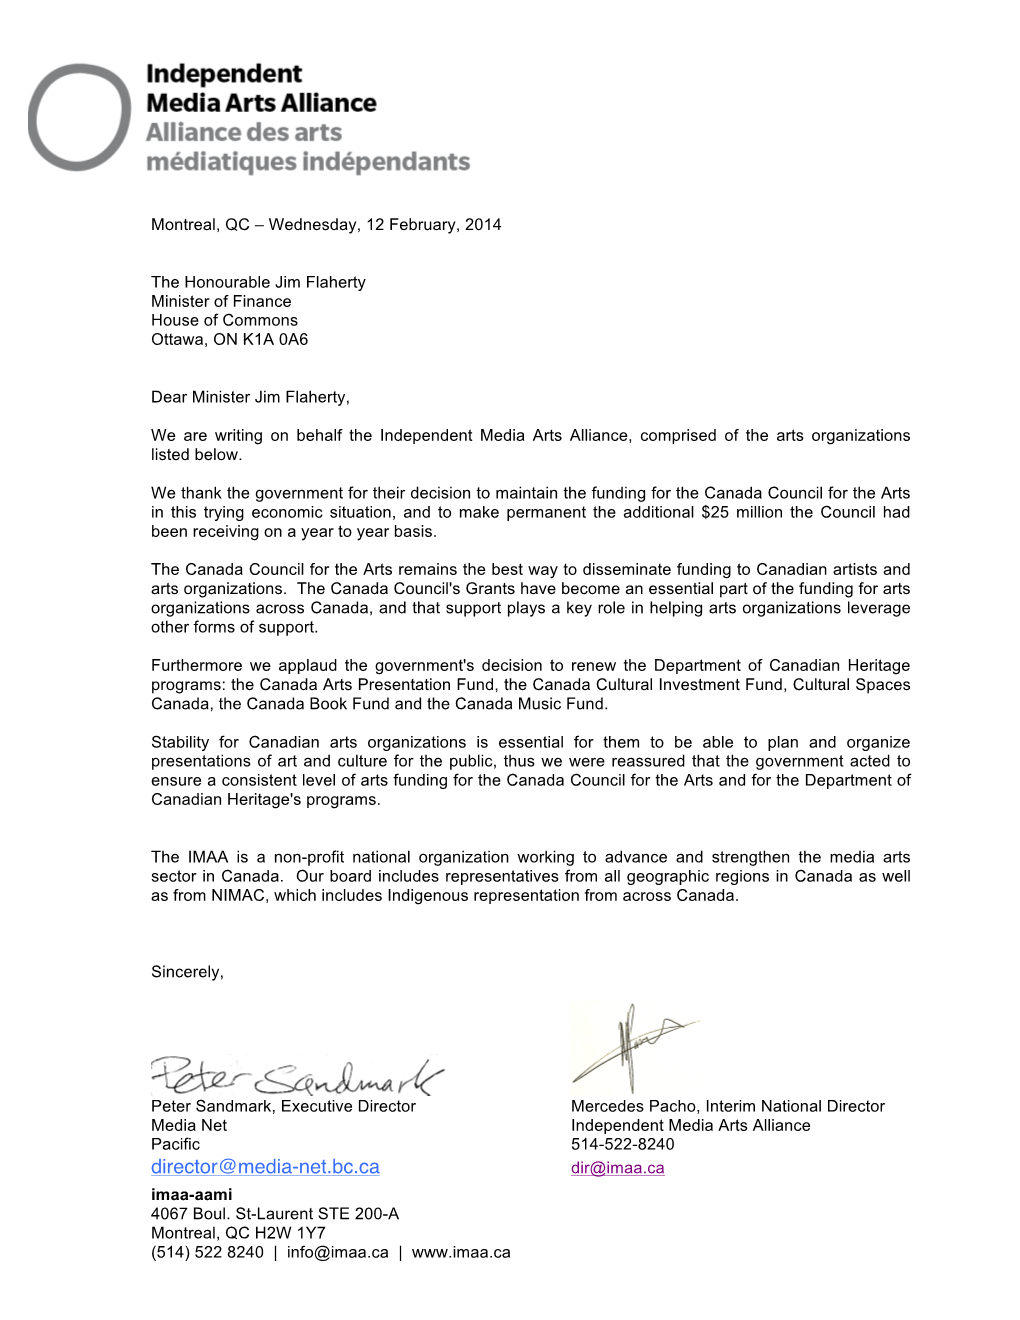 Letter Addressed to the Honourable Jim Flaherty, Minister of Finance